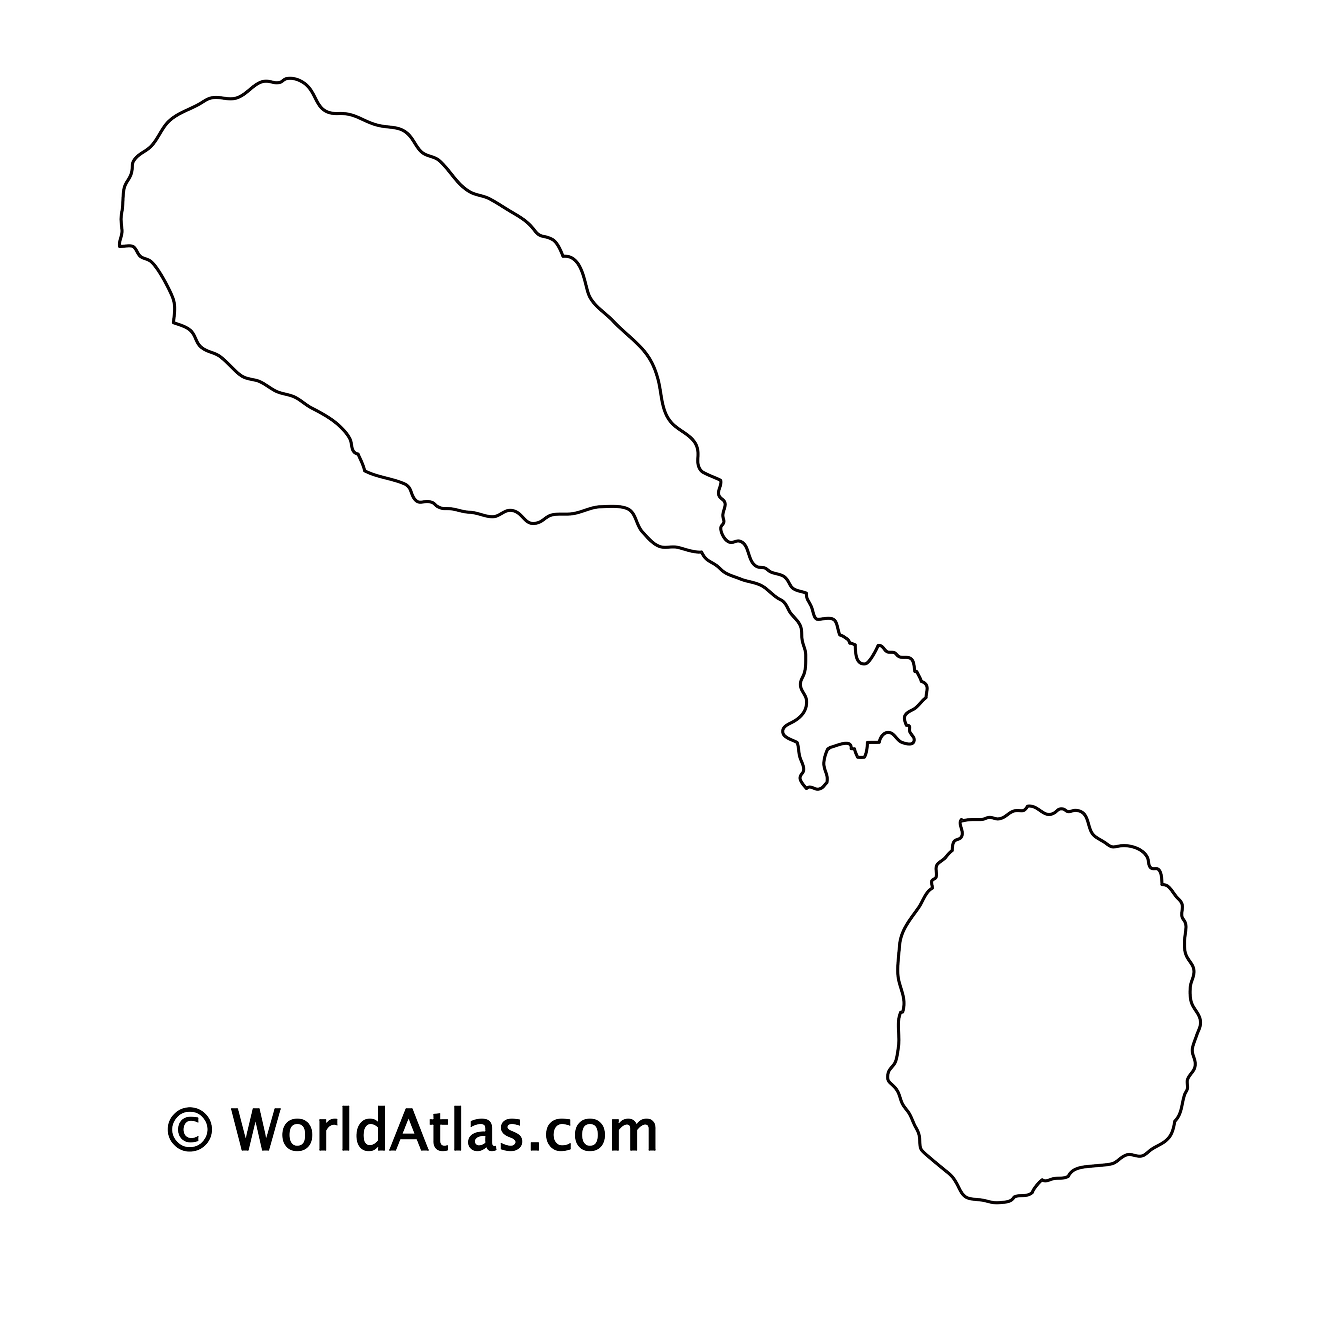 Blank Outline Map of Saint Kitts and Nevis